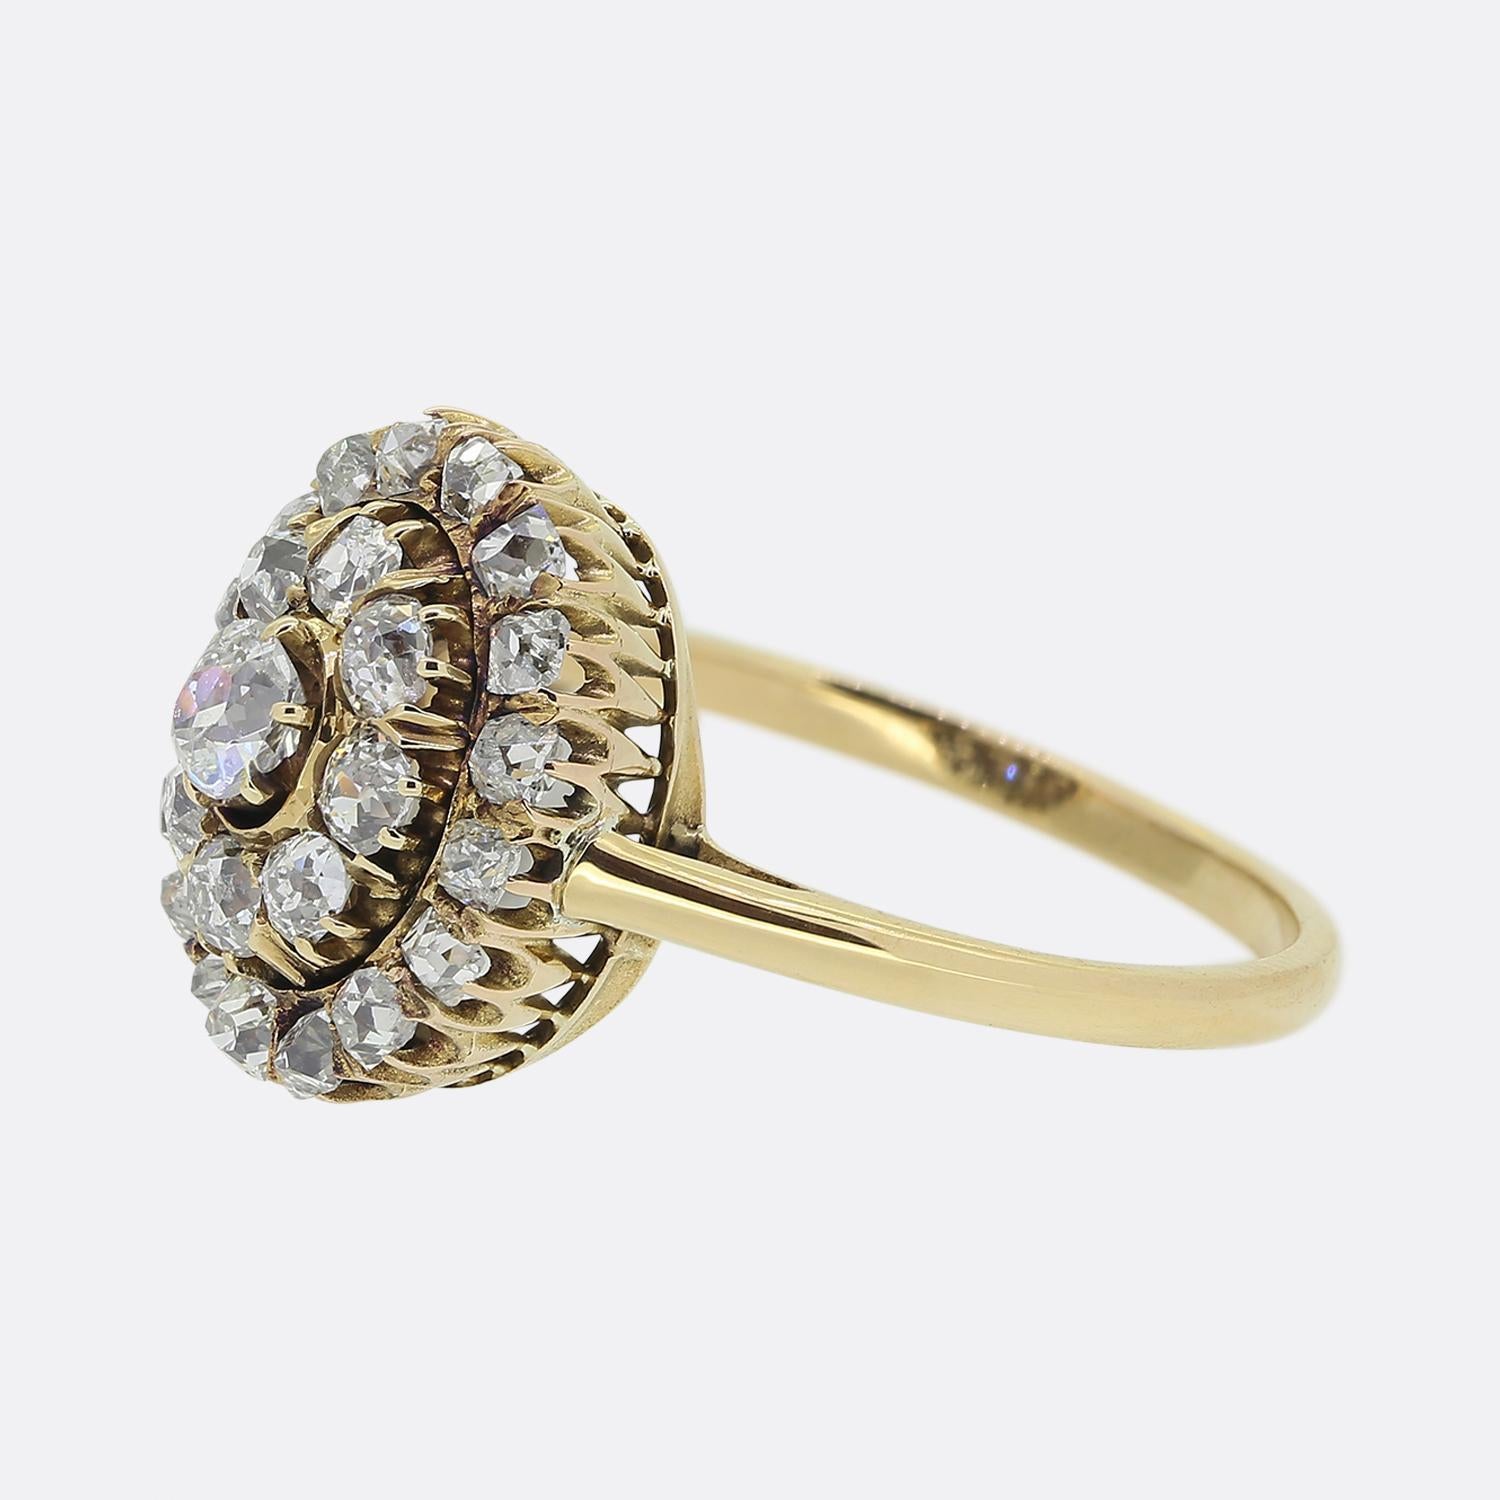 Here we have a charming diamond cluster ring from the Victorian era. This antique piece showcases an old cushion cut diamond at the centre of the face. This principal stone sits slightly risen and is surrounded by a double halo of chunky old cut